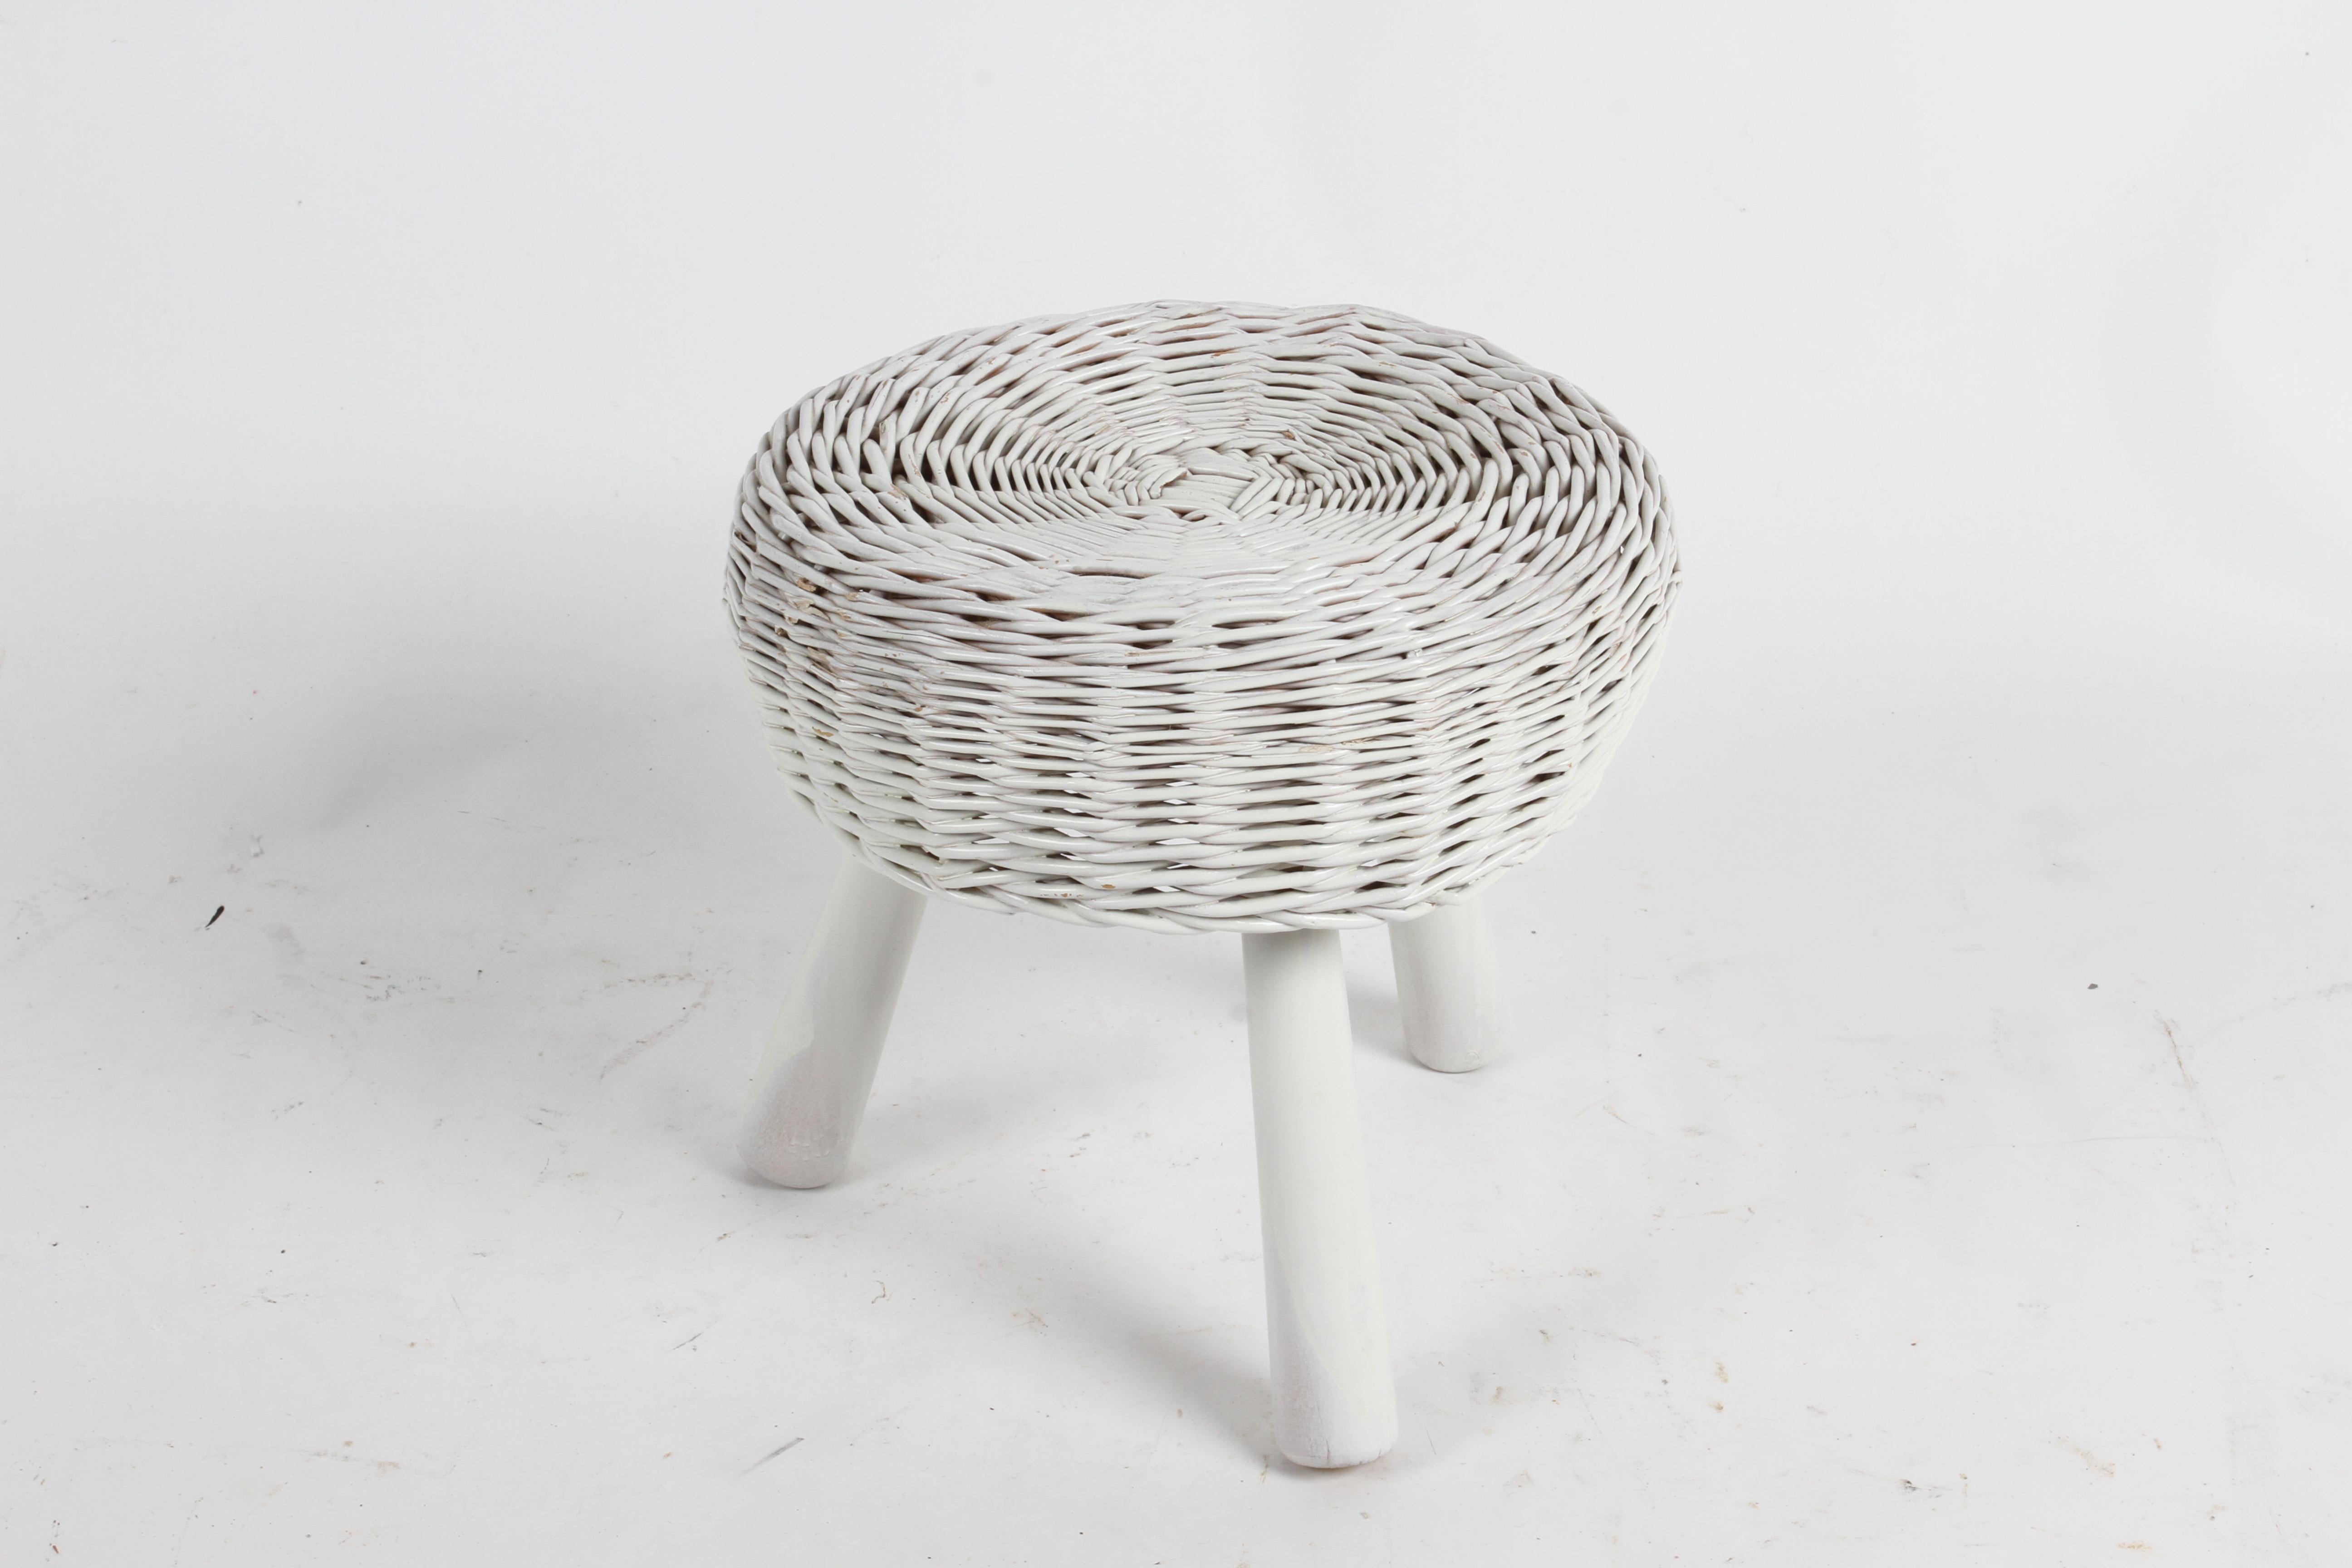 Mid-Century Modern Tony Paul round rattan or wicker stool on wood legs. Wicker has been spray painted at some point, some runs , wear to finish and minor loss to rattan. See Images.

